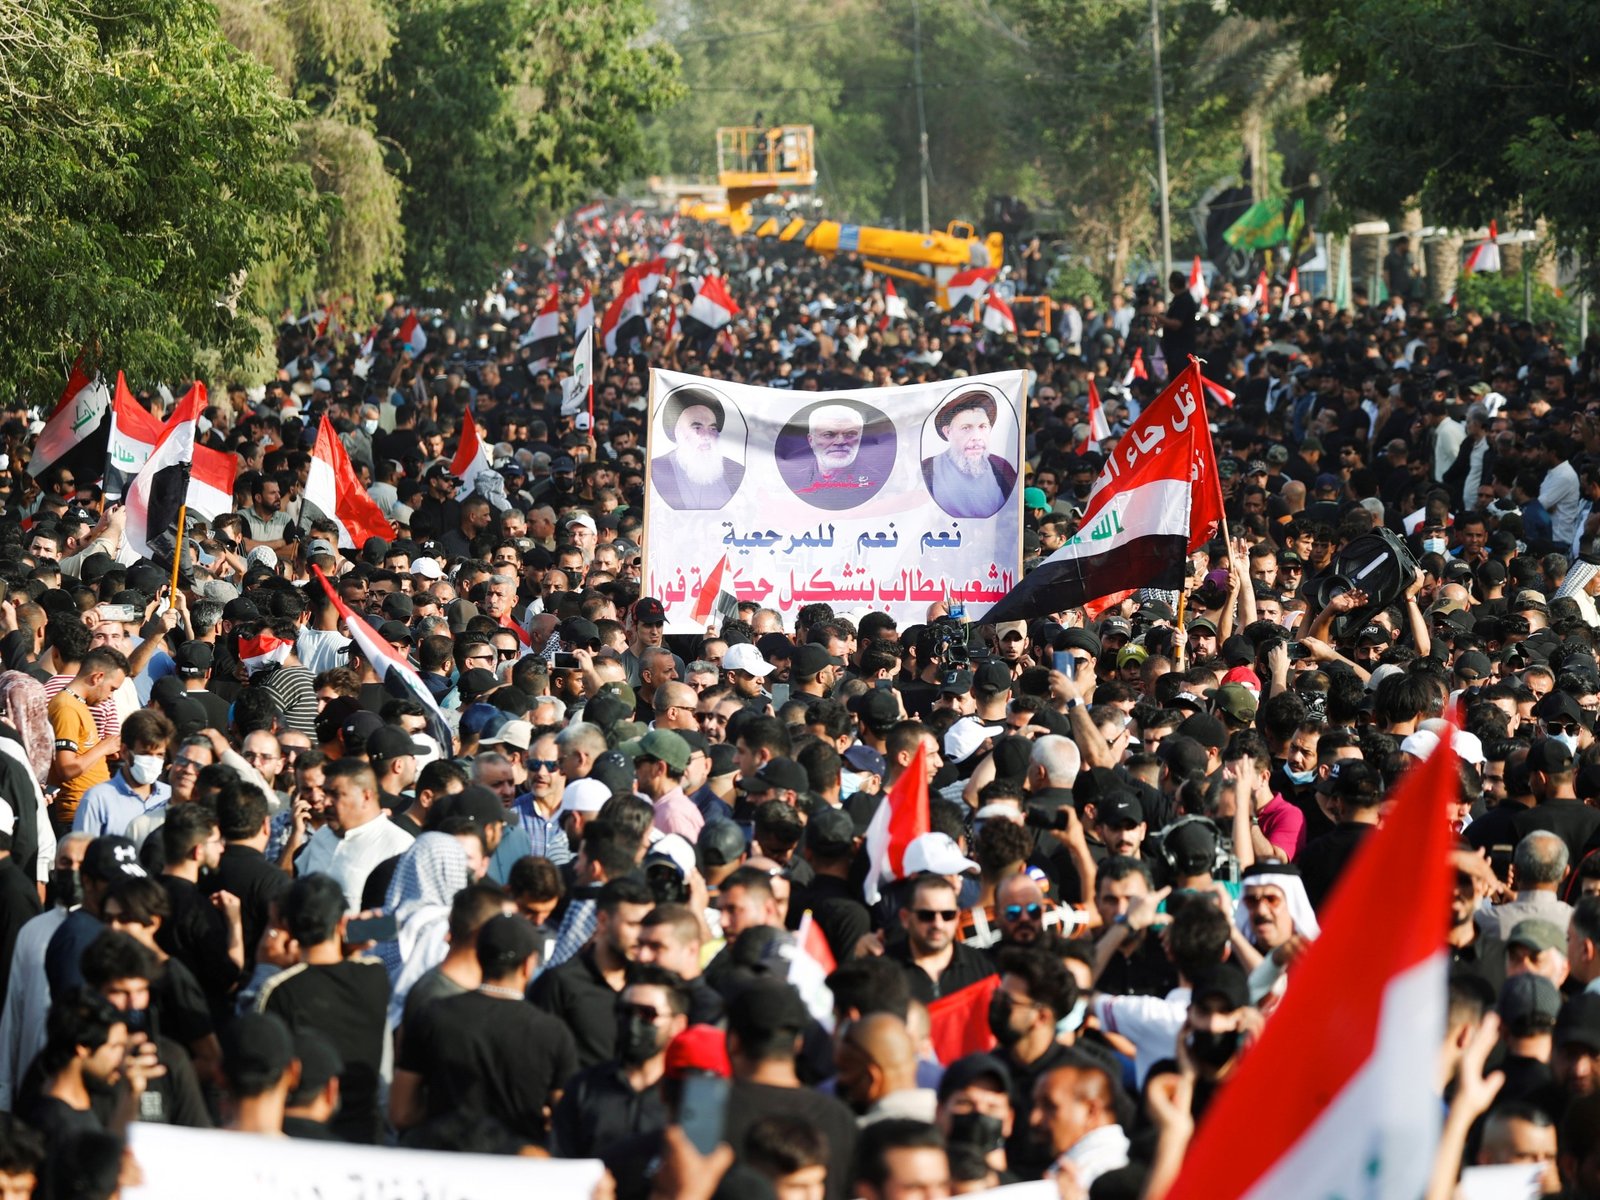 A leader in the coordination framework: Most of those who demonstrated yesterday, Friday, near the Muallaq Bridge, are supporters of the Al-Bashaer movement affiliated with Al-Maliki and Asa’ib.